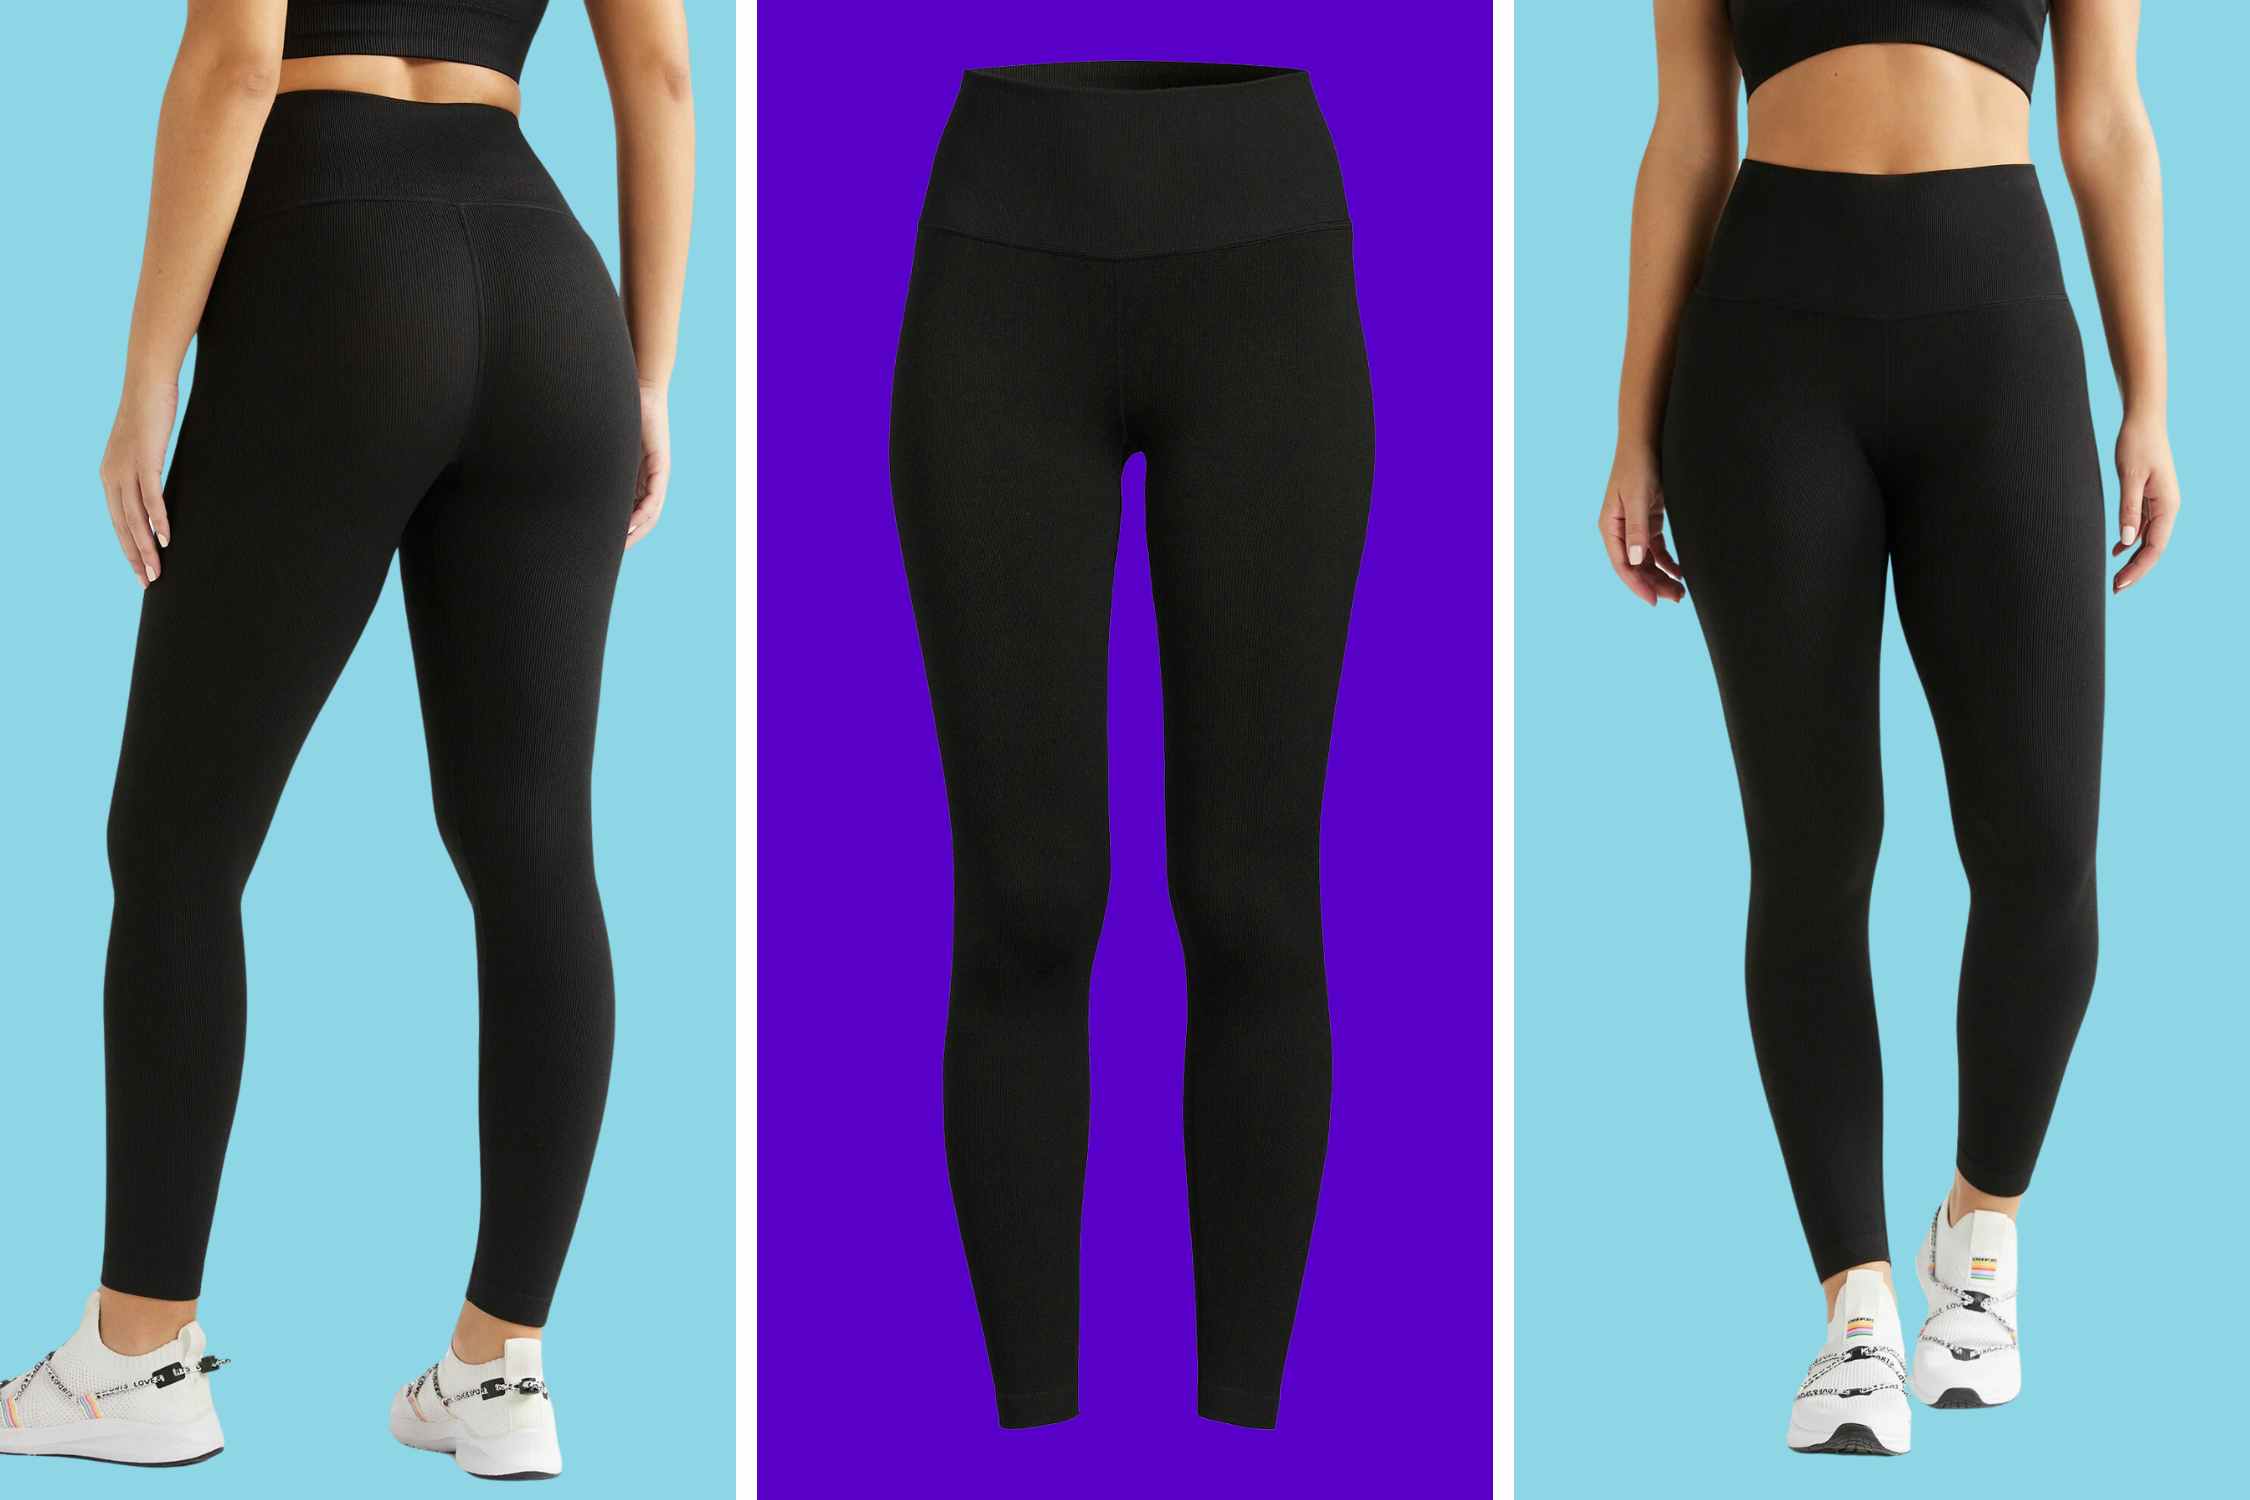 Clearance Find: $8 Active Leggings at Walmart (Reg. $26)